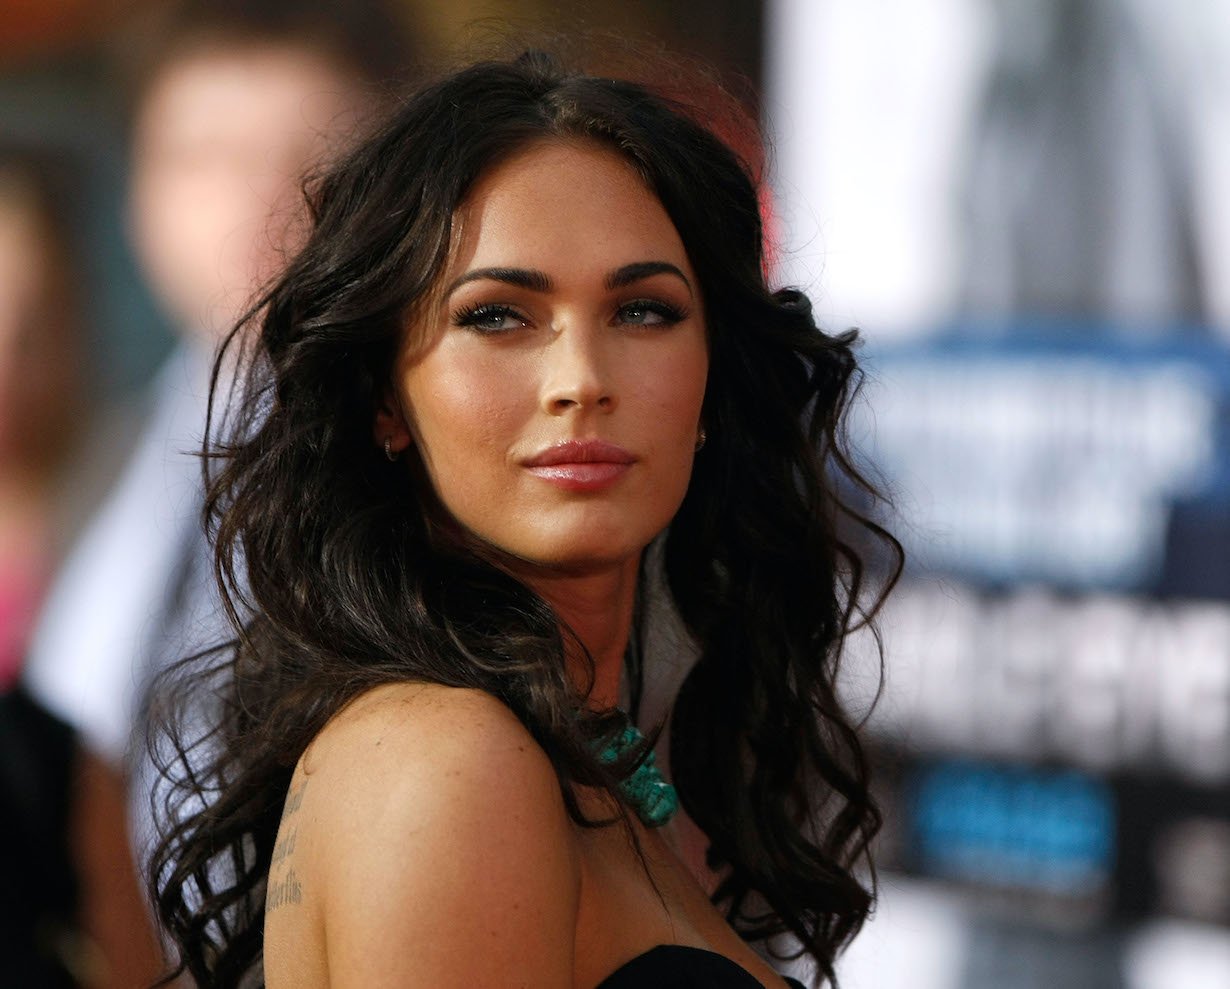 Crew Members of 'Transformers' Once Wrote a Sexist Letter About Megan Fox,  Calling Her an 'Unfriendly B*tch'